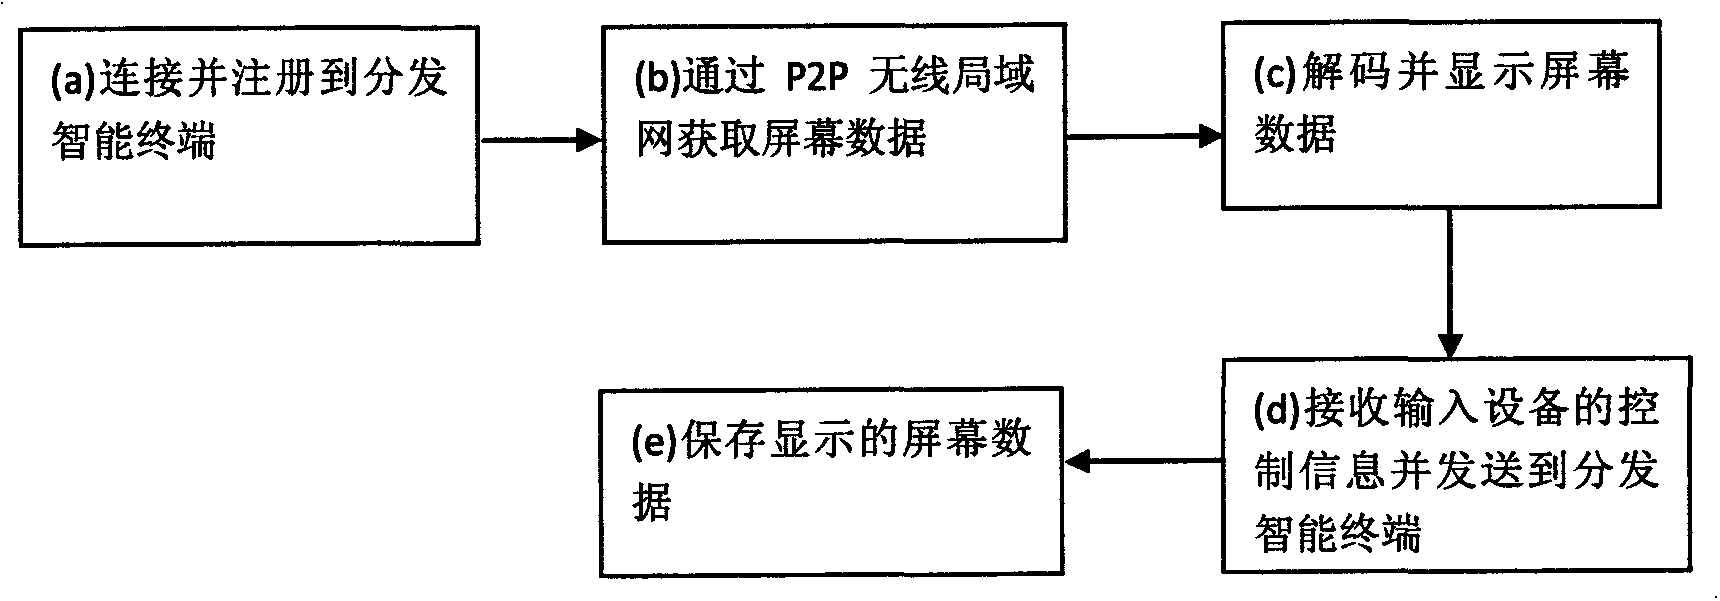 Information real-time sharing method based on wireless local area network